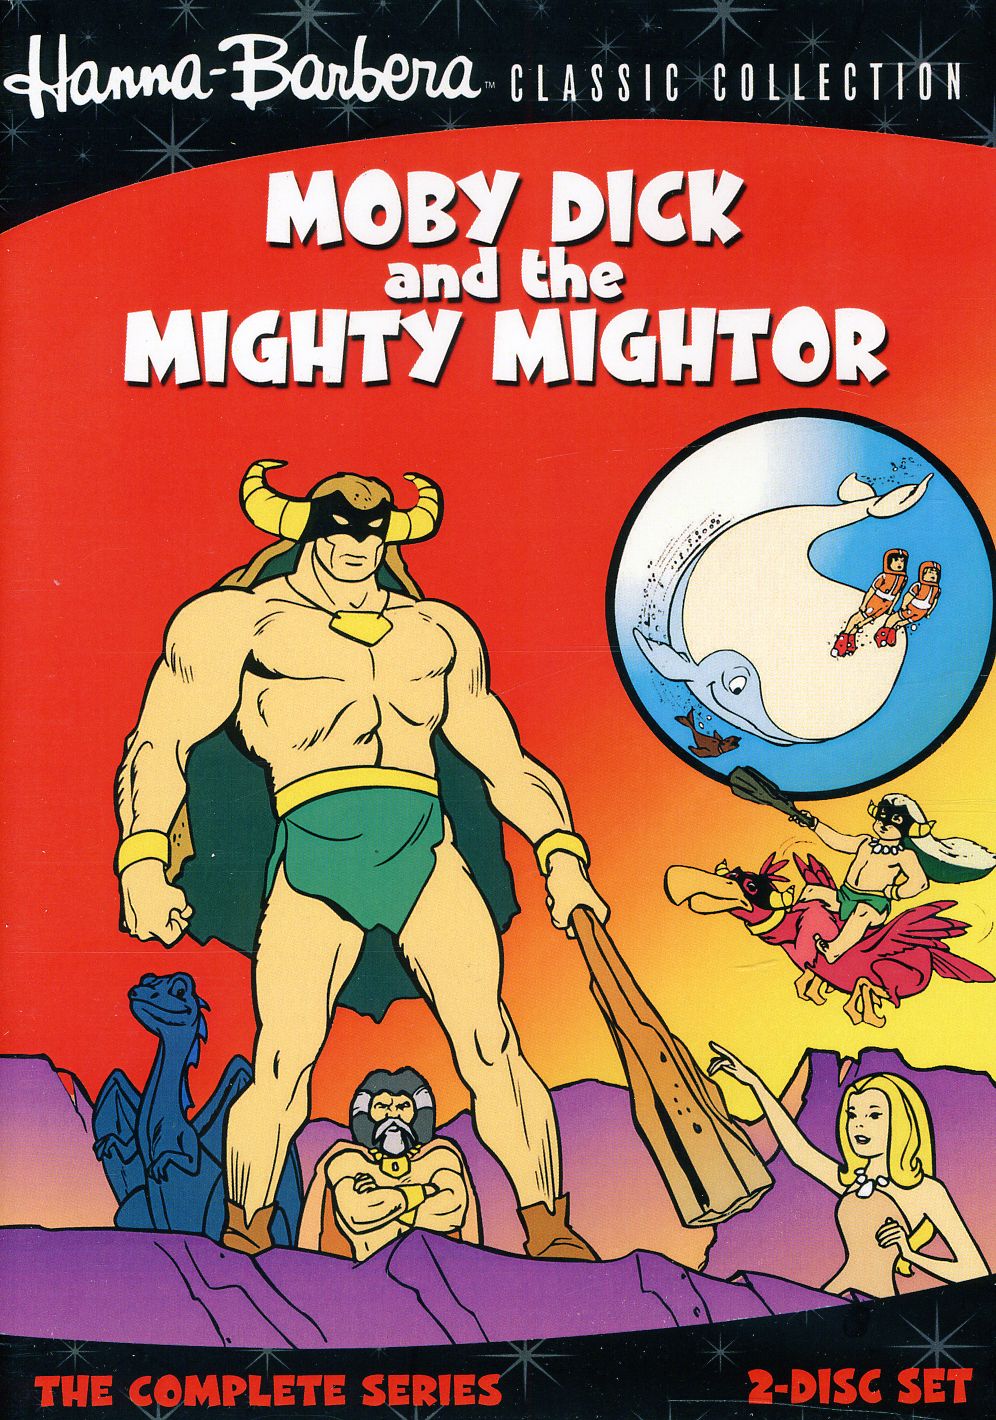 MOBY DICK & THE MIGHTY MIGHTOR: COMPLETE SERIES